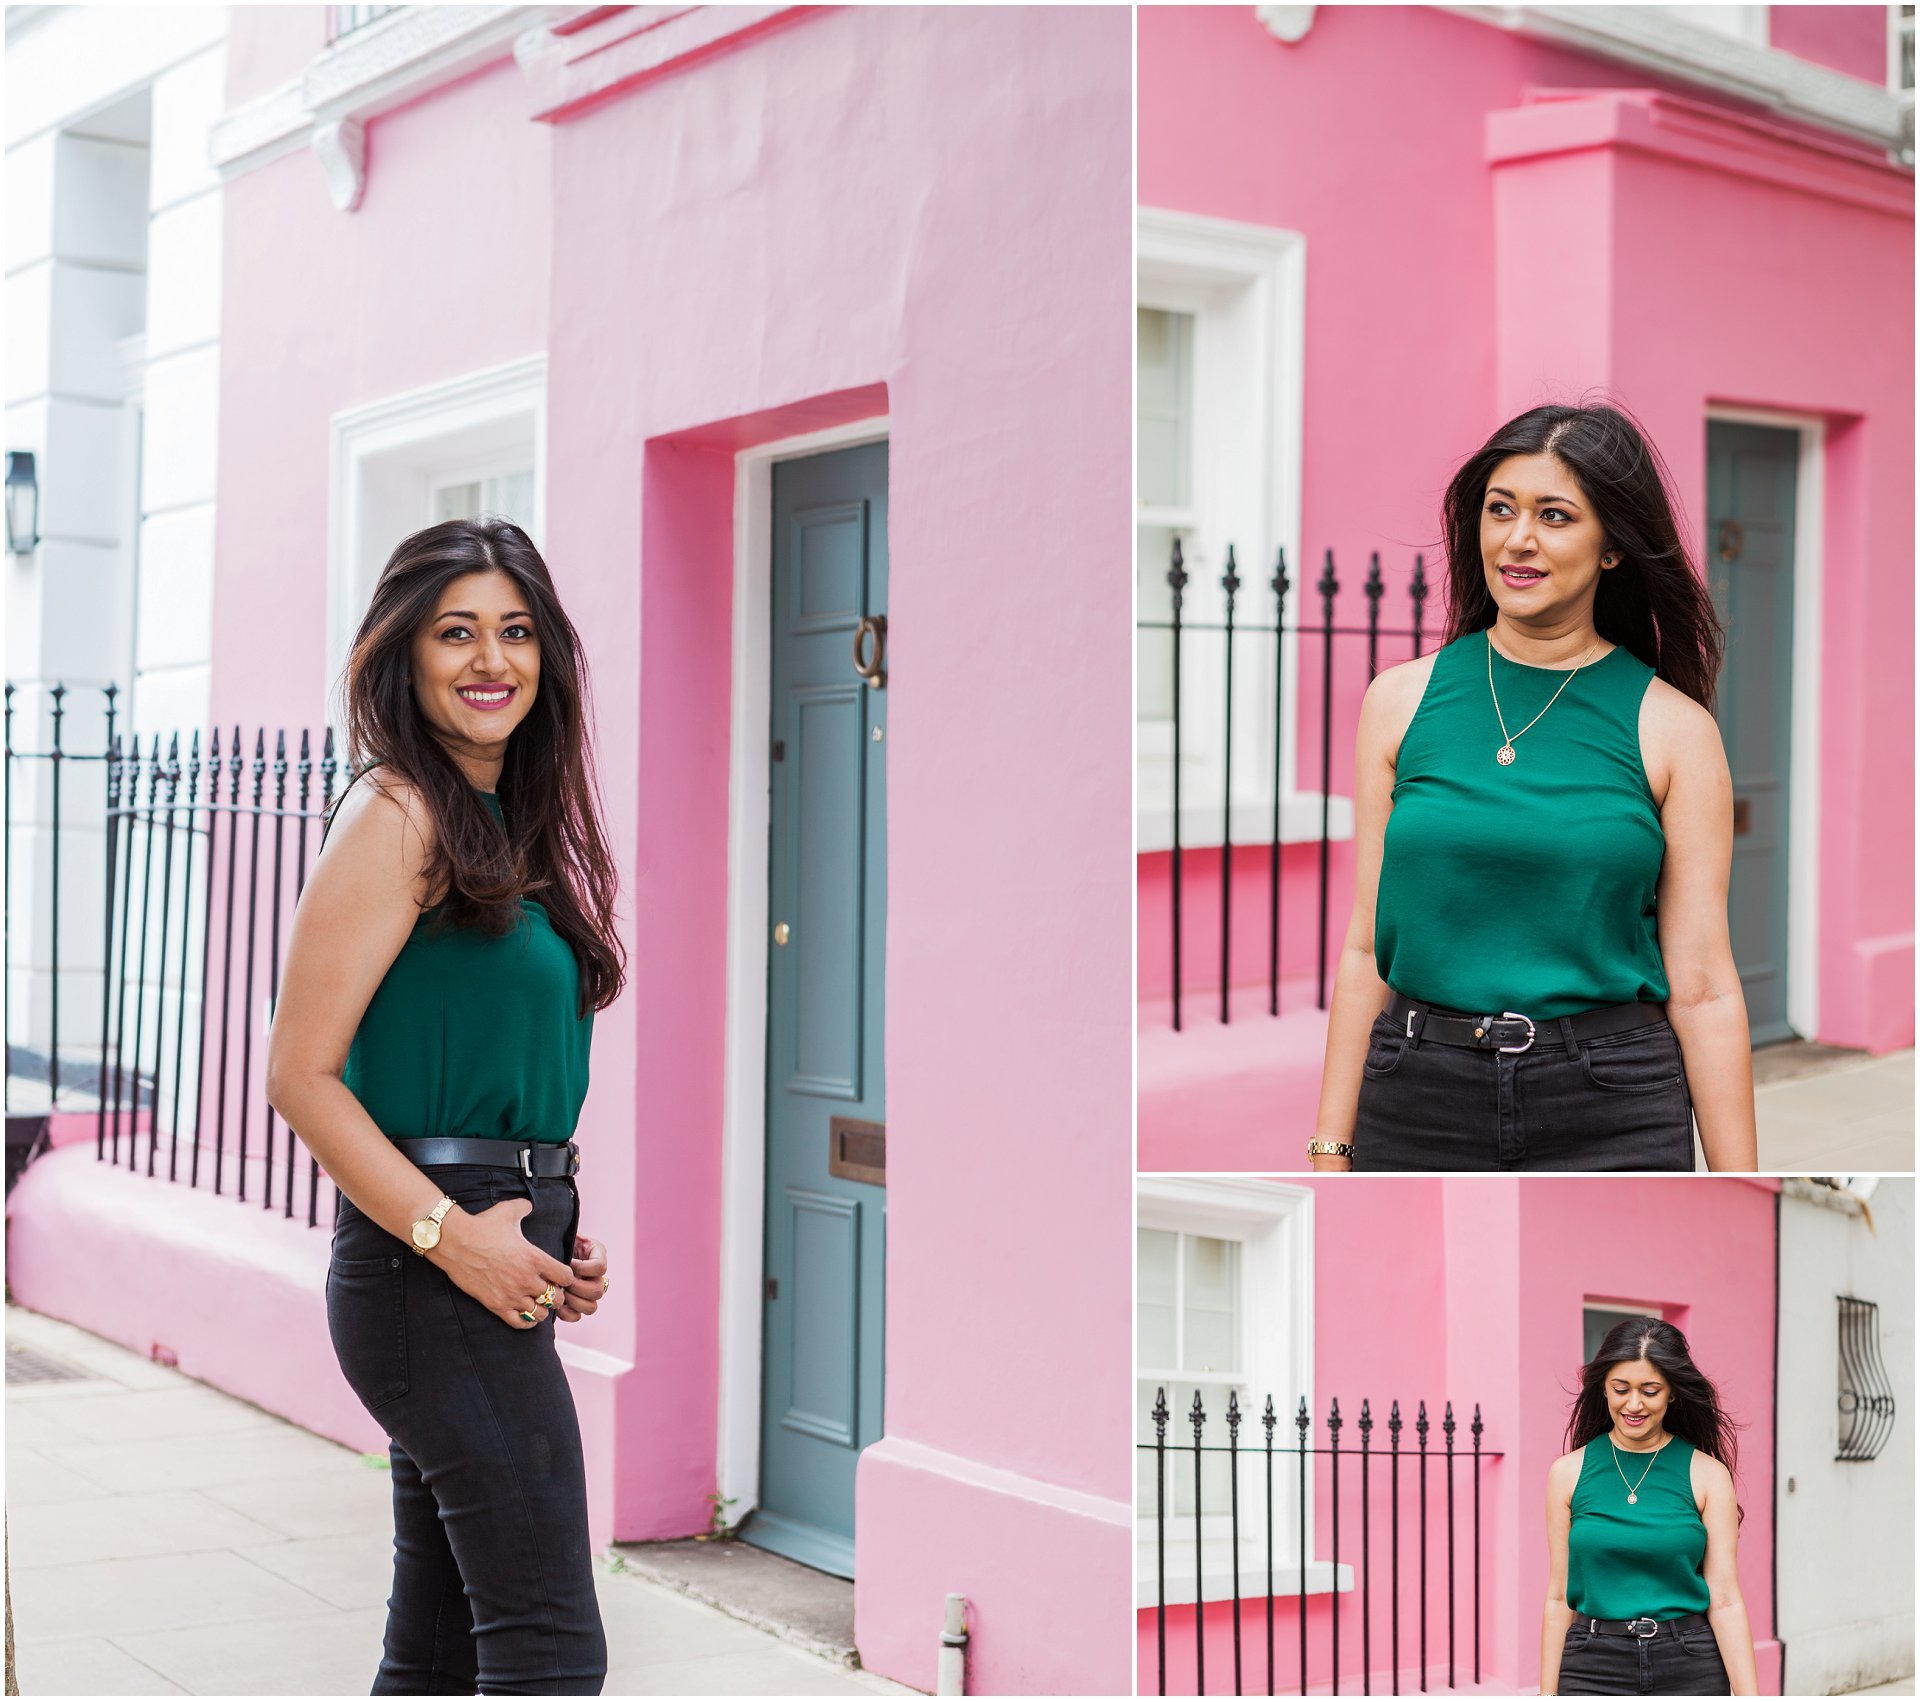 Brand portraits on a pink street in West London. Images by London brand photographer AKP Branding Stories